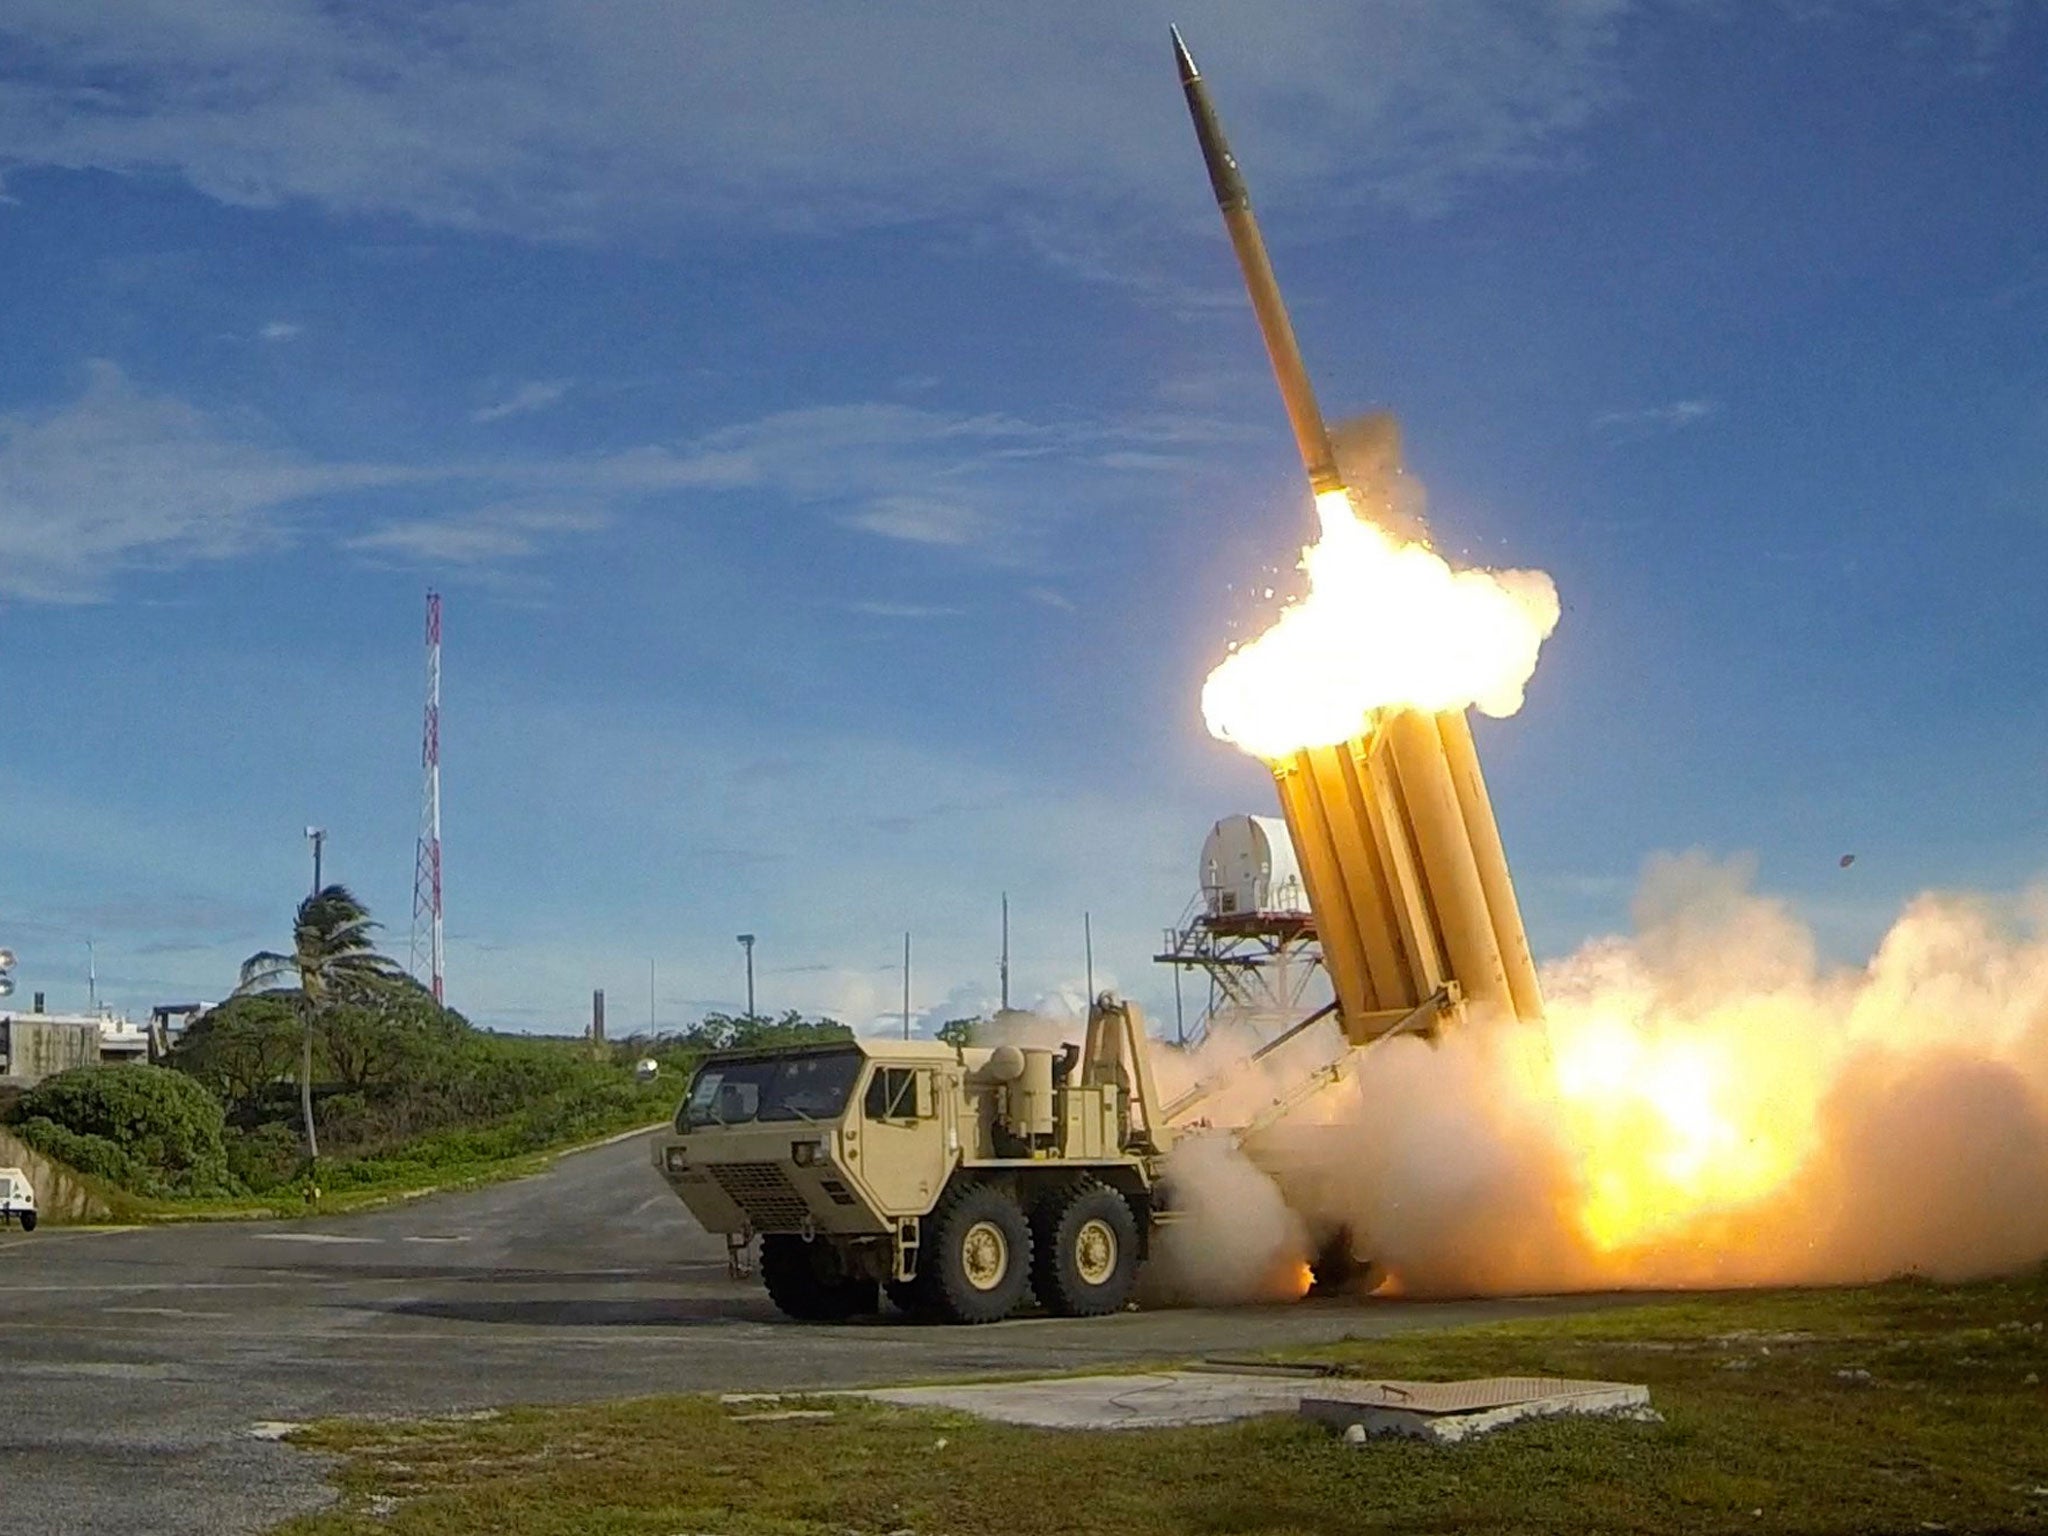 The company behind THAAD claims the system has had 100 per cent success intercepting missiles since testing began in 2005